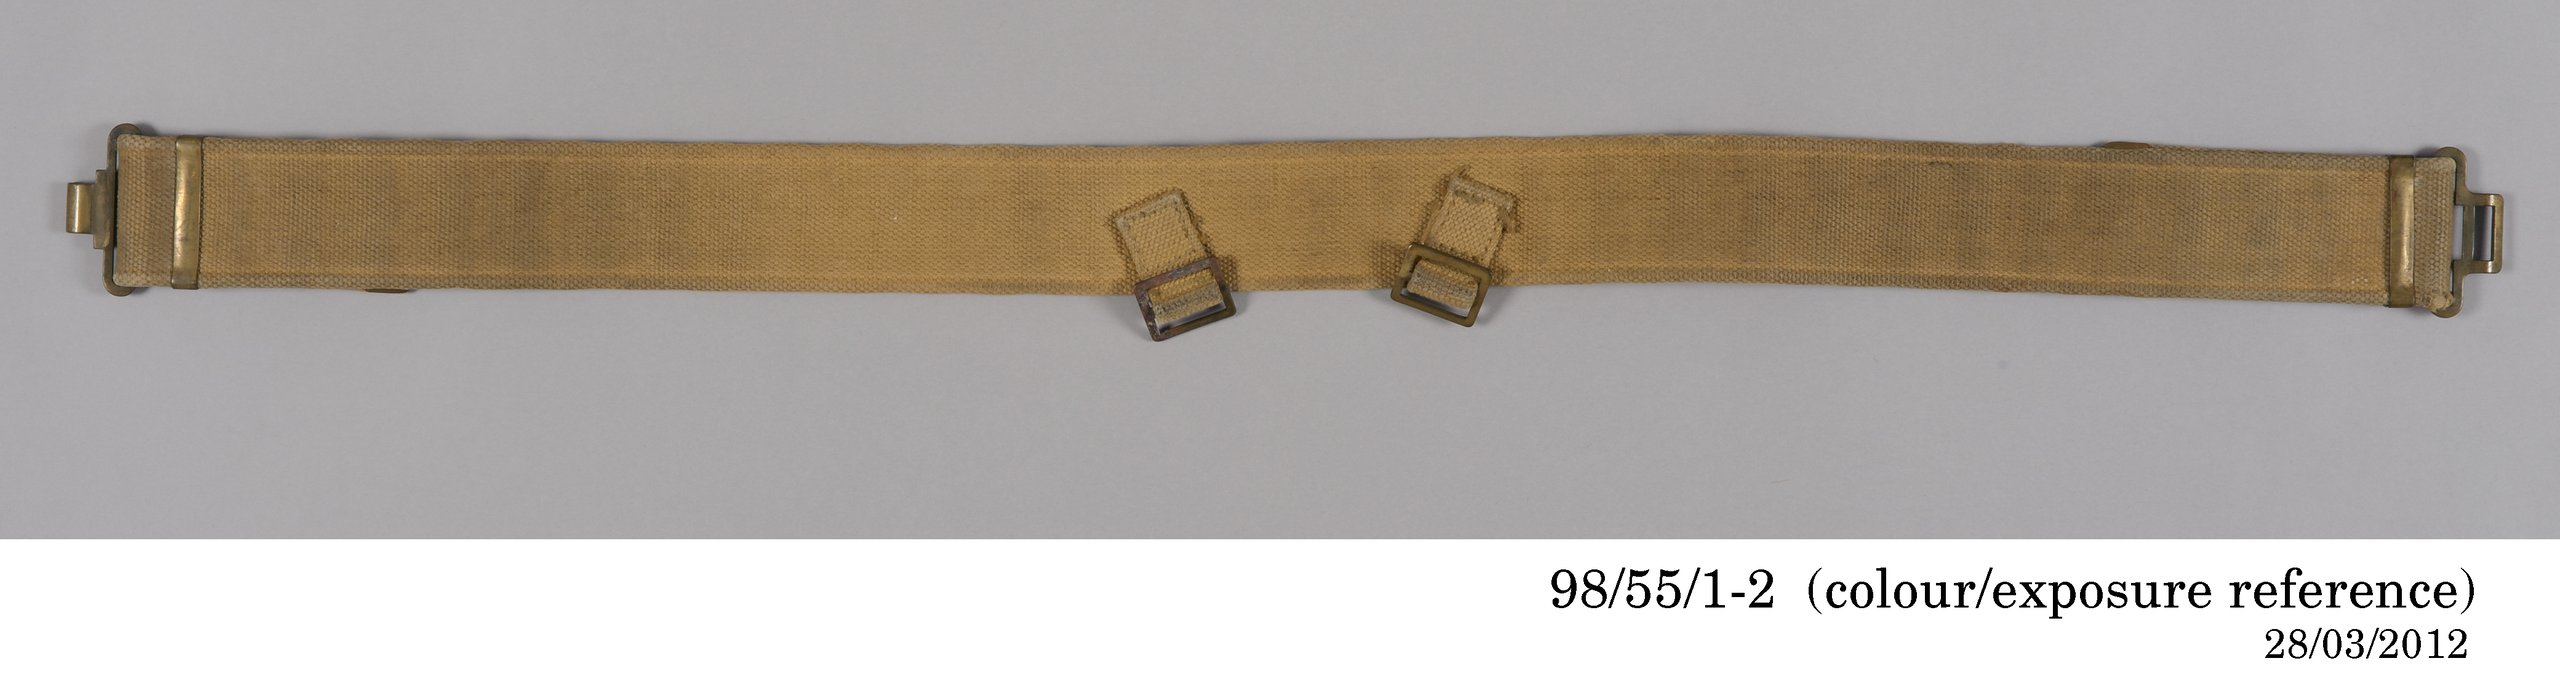 Belt used by Charles Laseron during Mawson's Australasian Antarctic Expedition